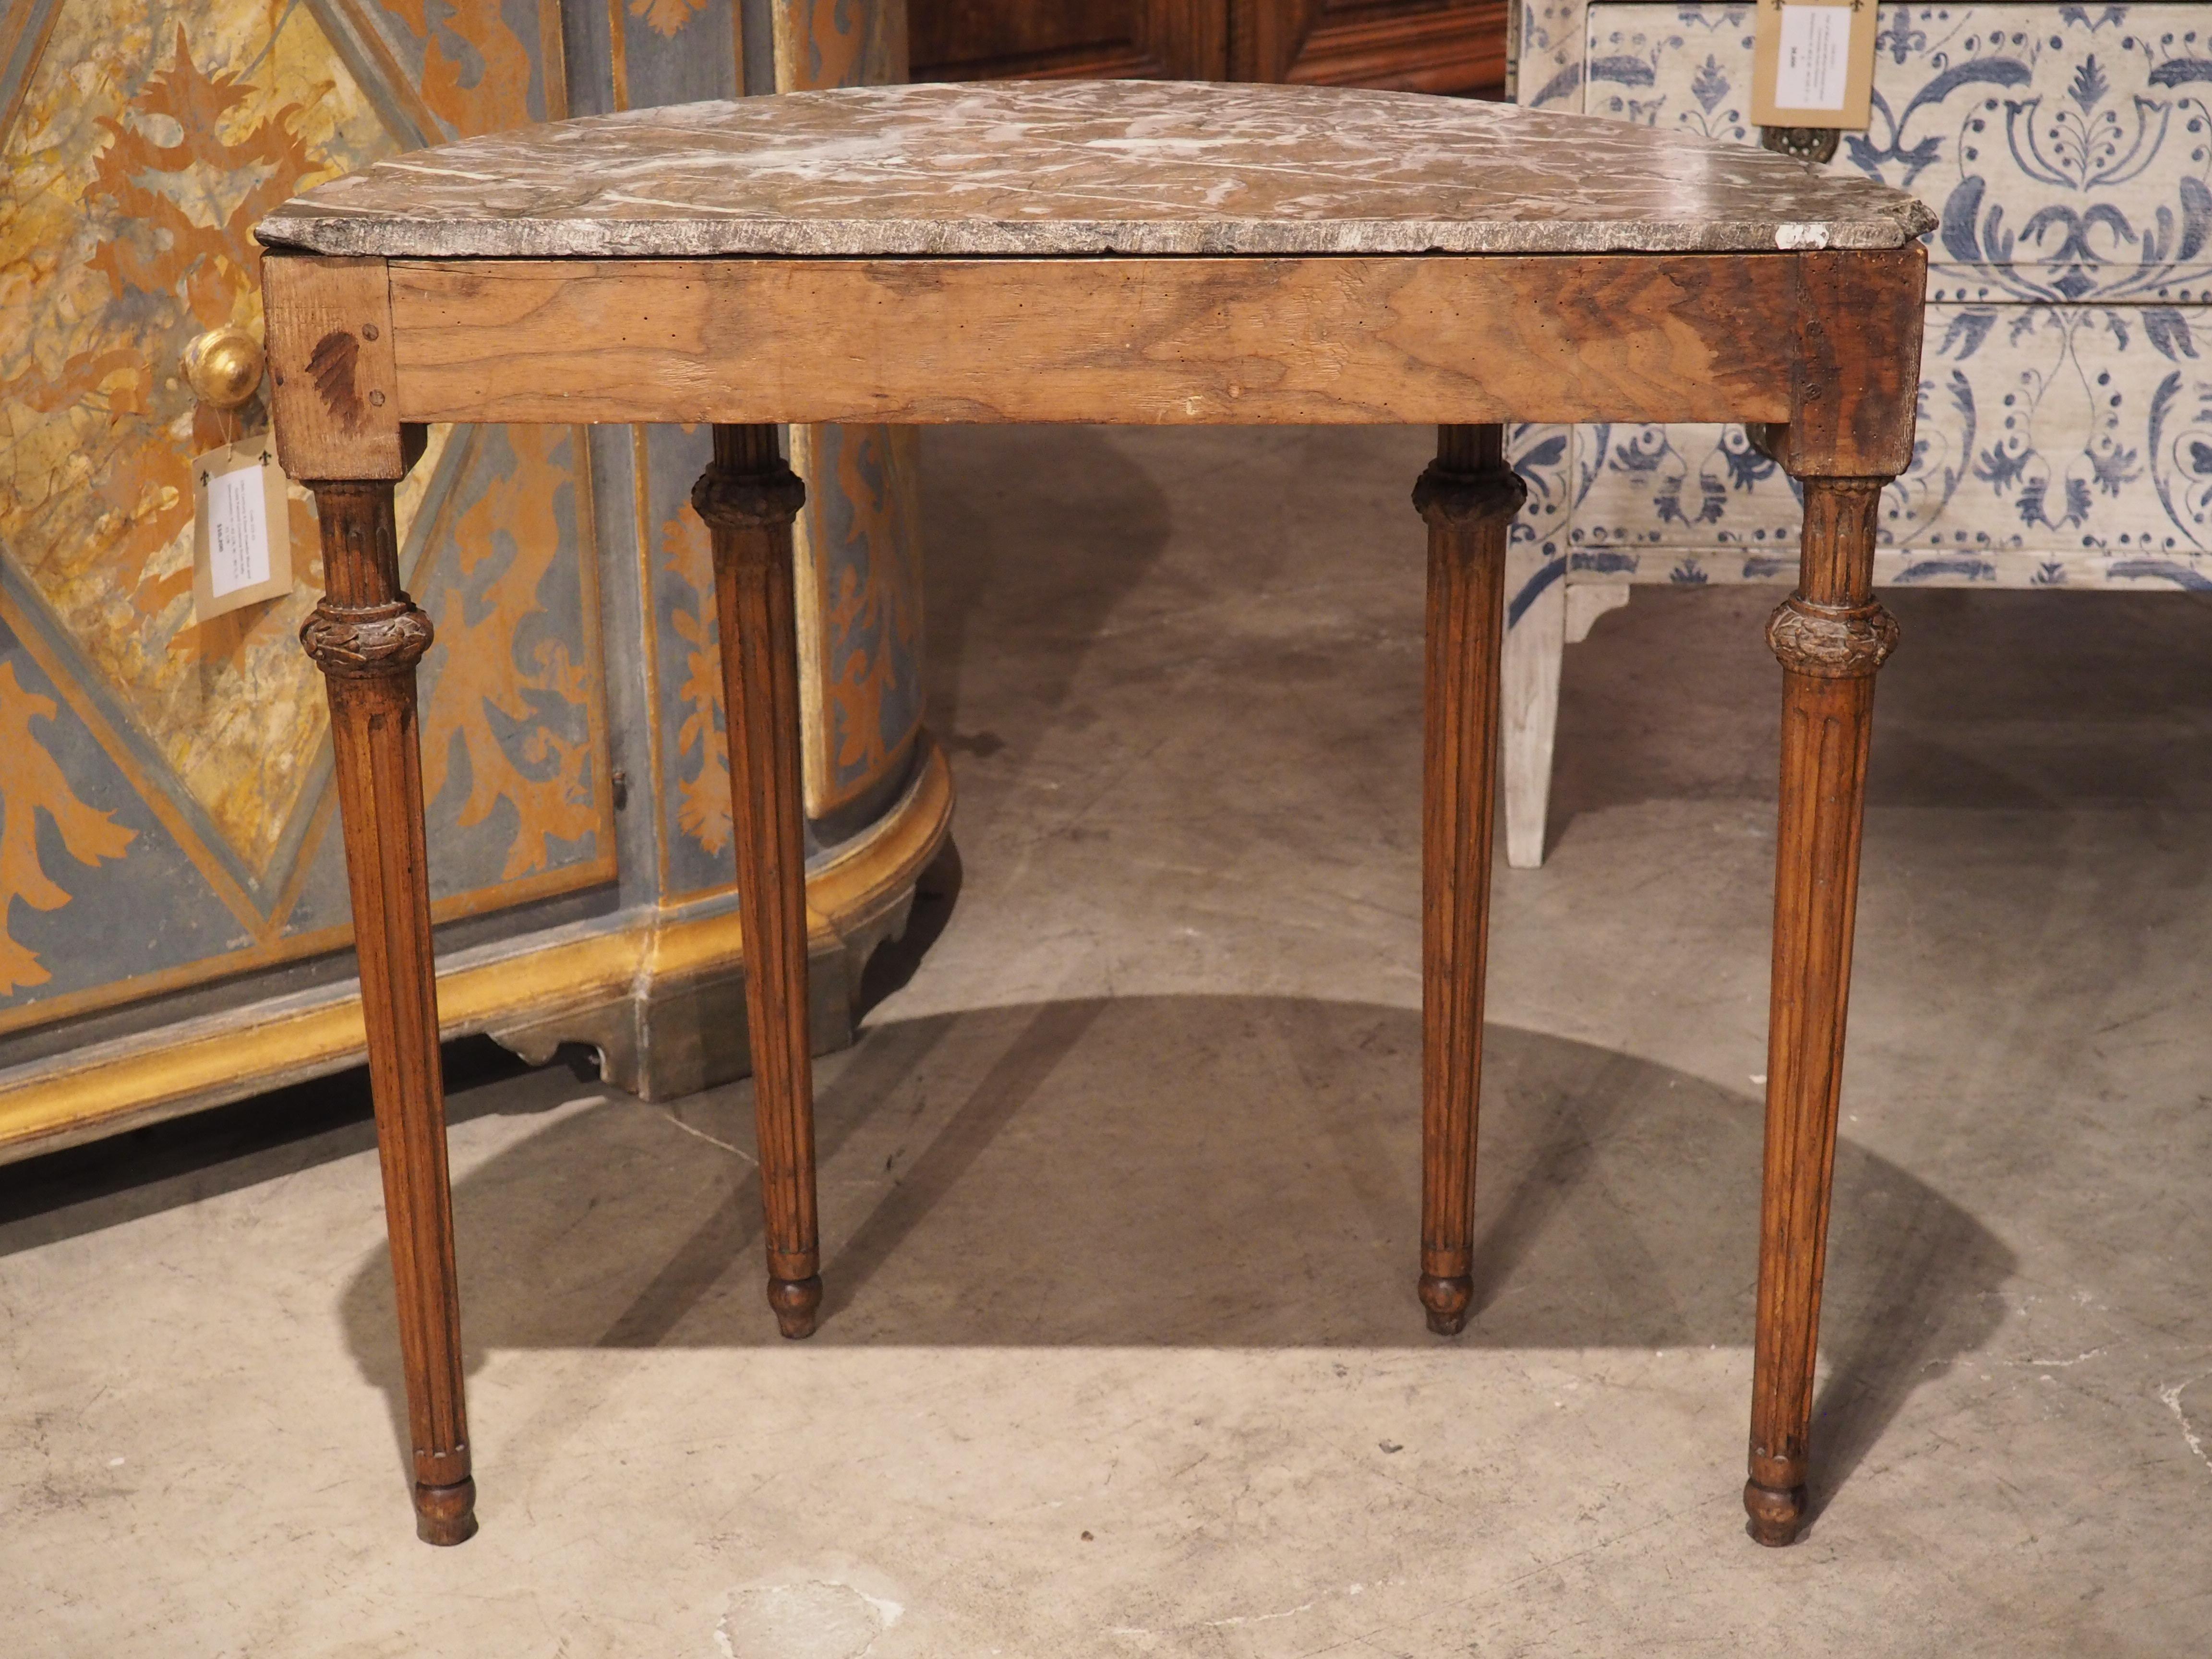 Period French Louis XVI Carved Oak and Marble Demi Lune Console Table, C. 1785 For Sale 9